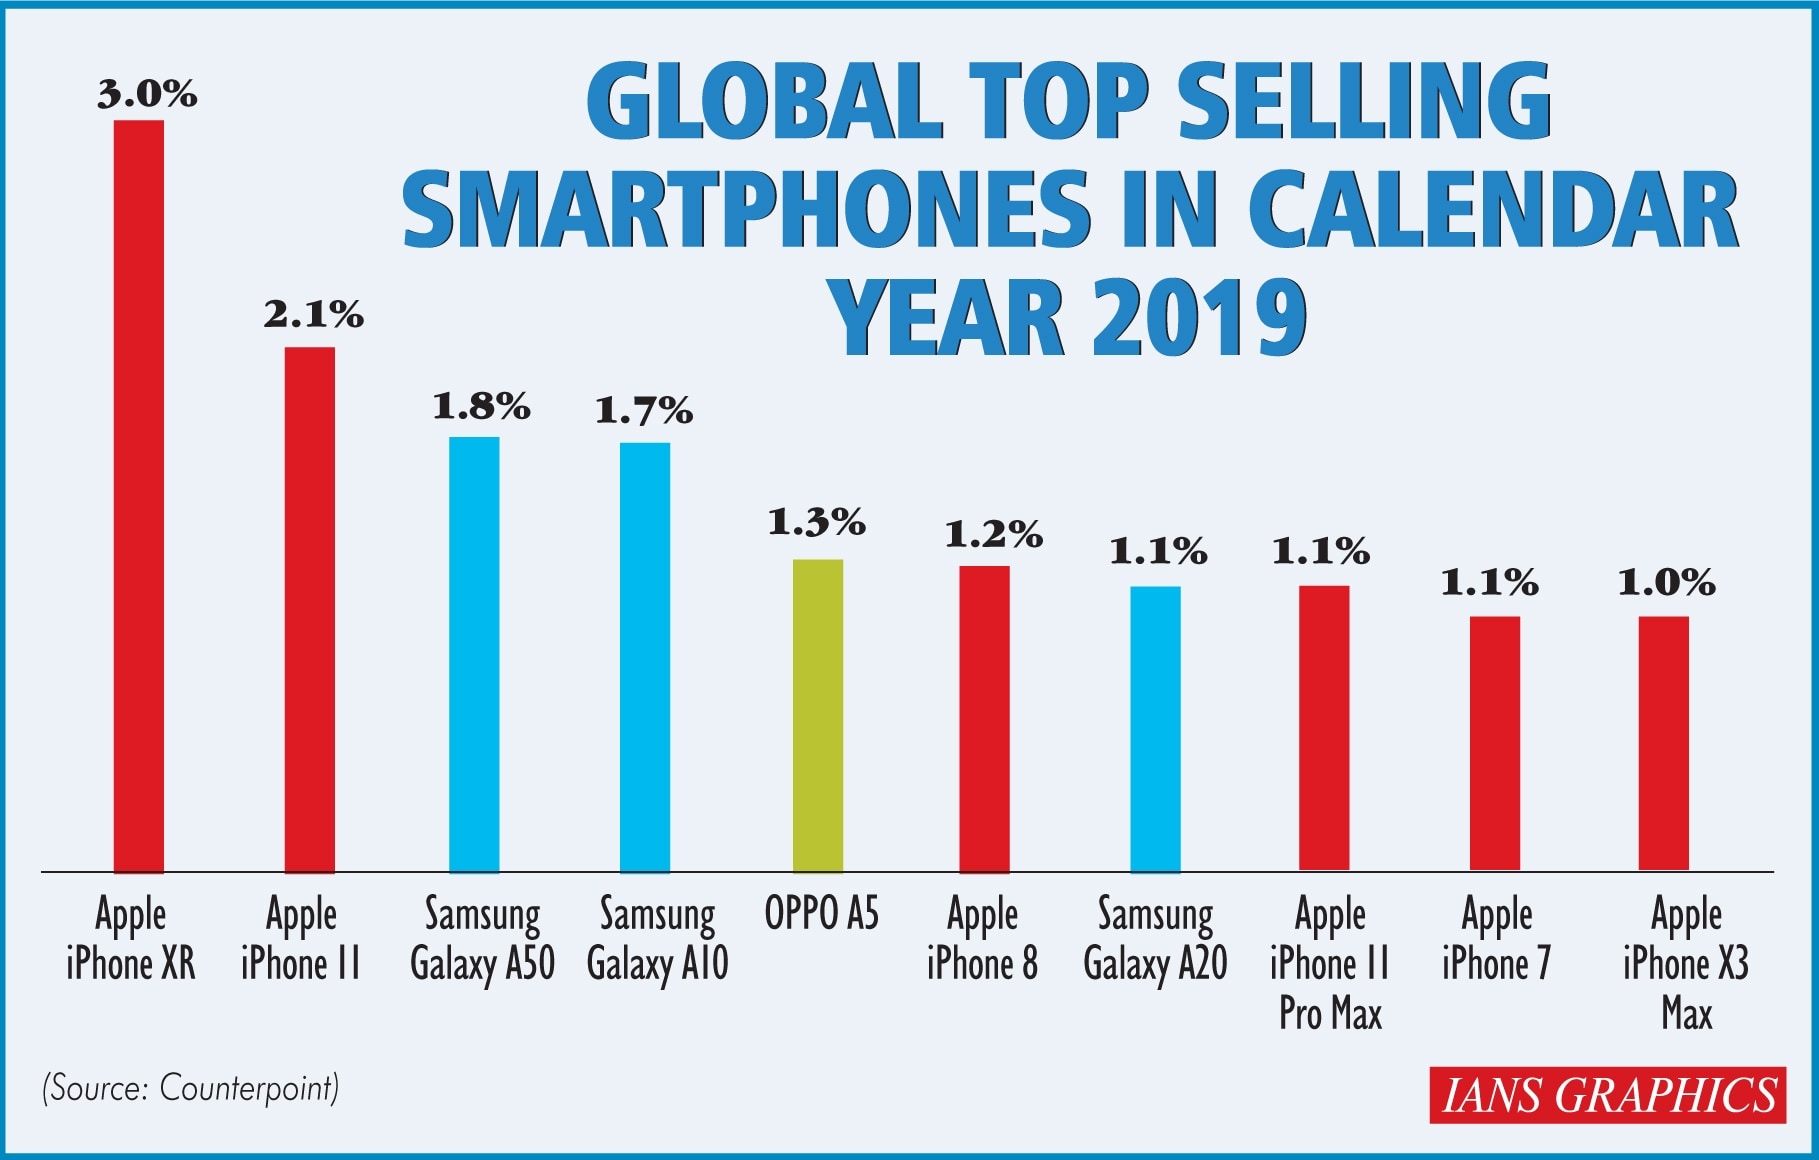 iPhone XR was the world's best selling smartphone in 2019, followed by iPhone 11